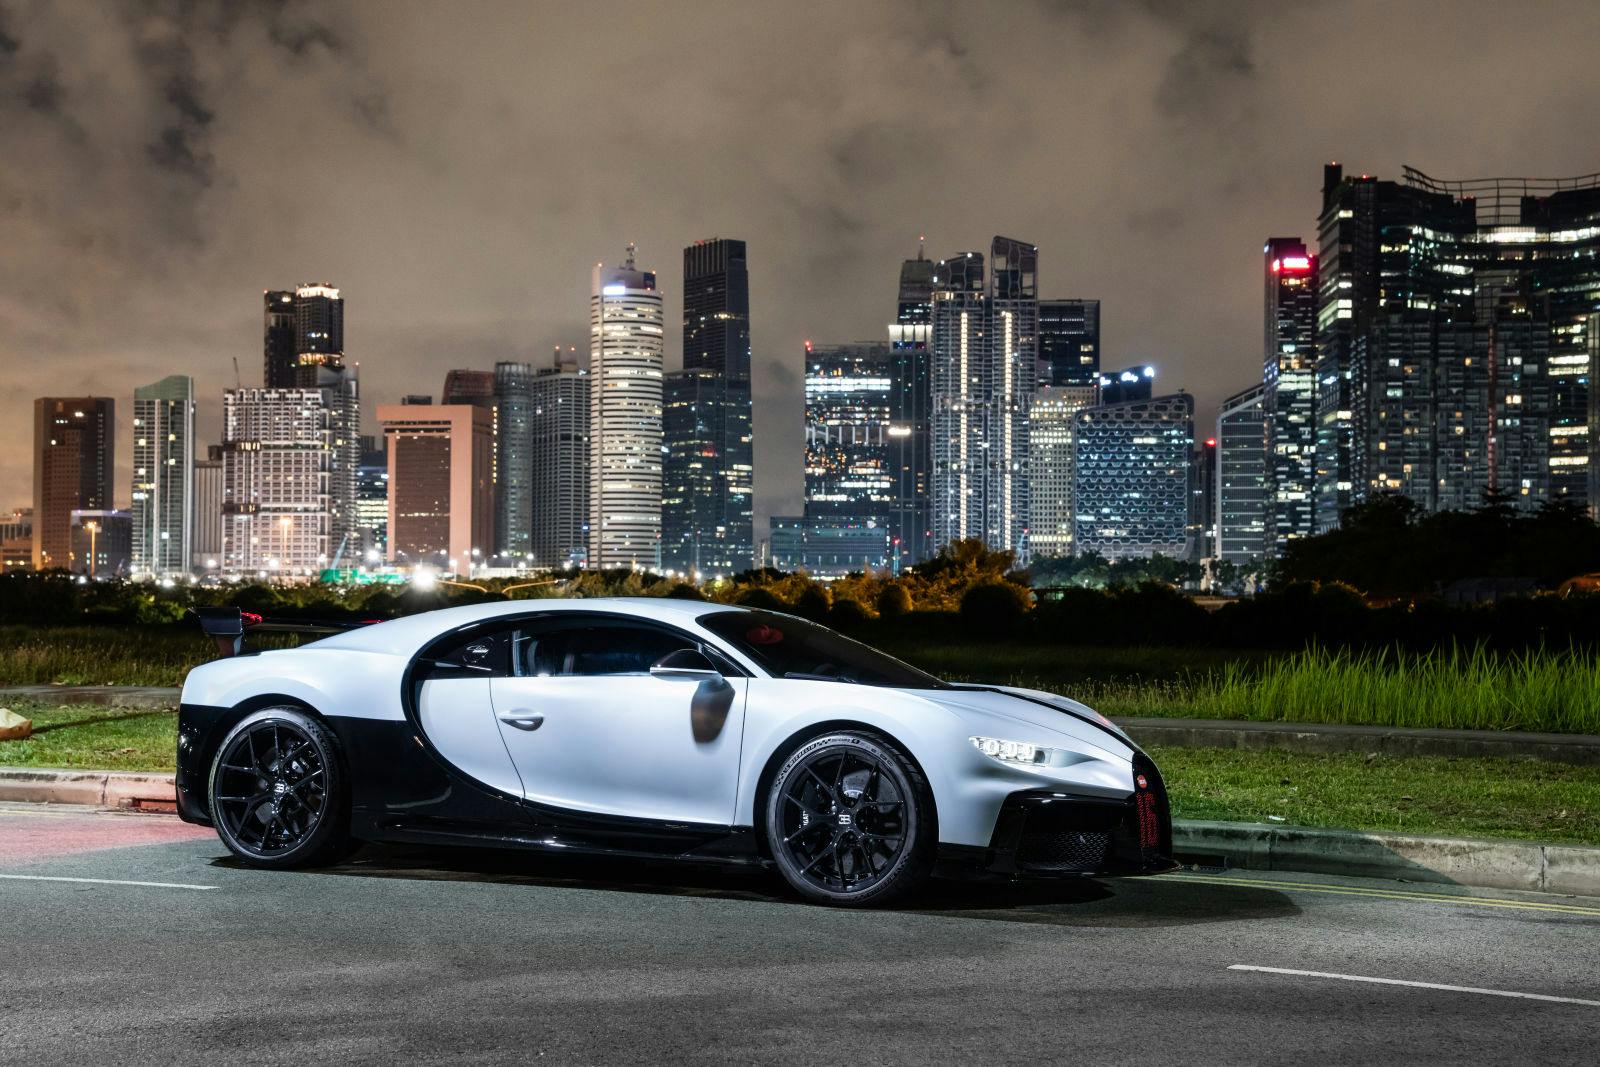 The Chiron Pur Sport will be the centerpiece of Bugatti’s first showroom opening in Singapore.